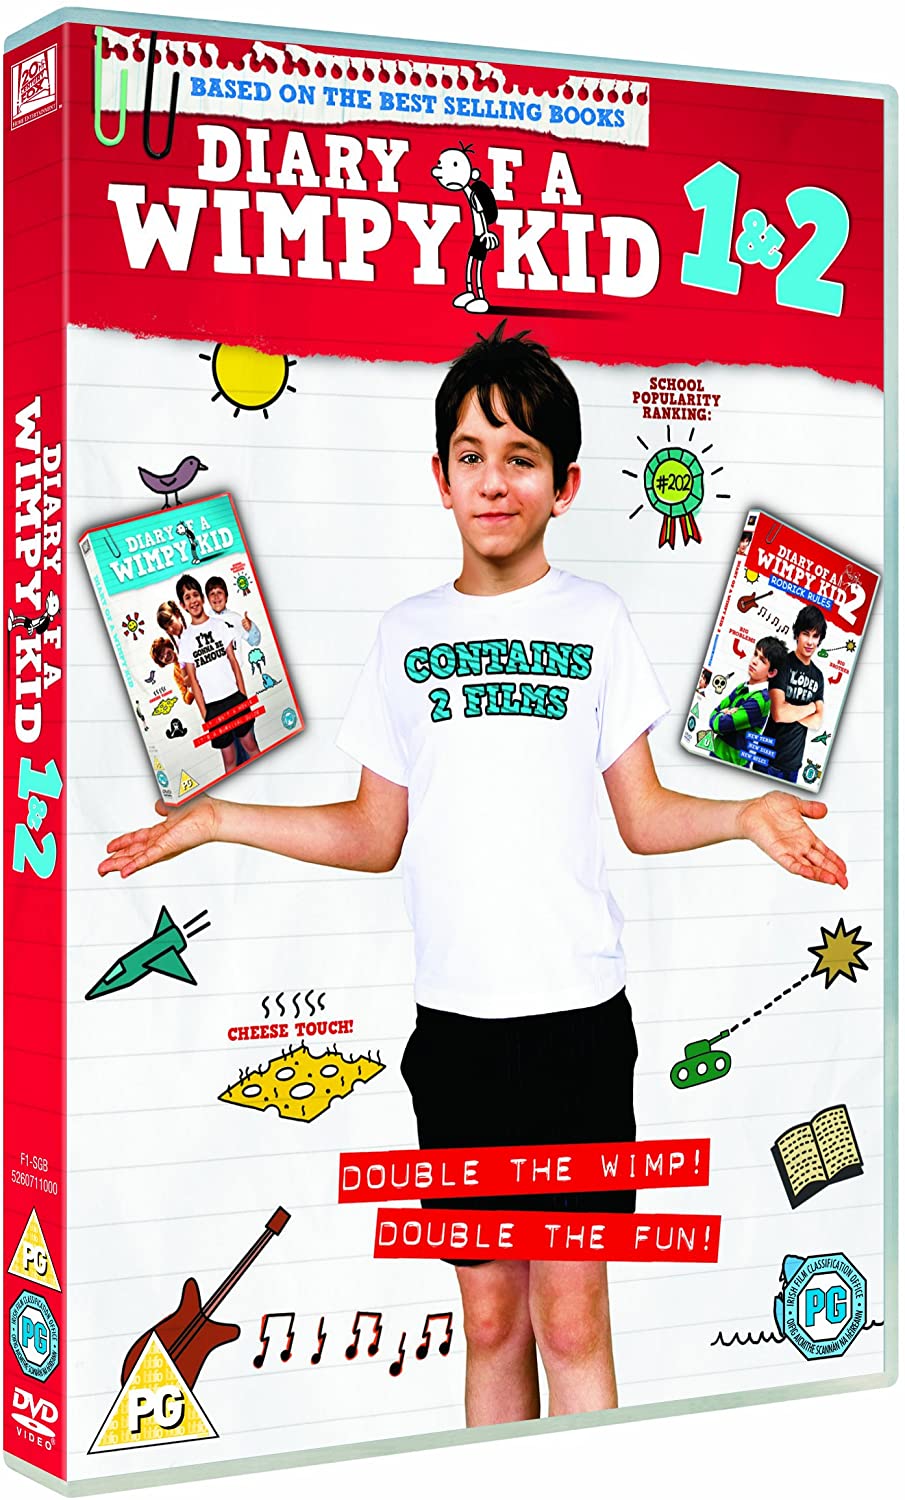 Diary of a Wimpy Kid 1 and 2 - Family/Comedy [DVD]